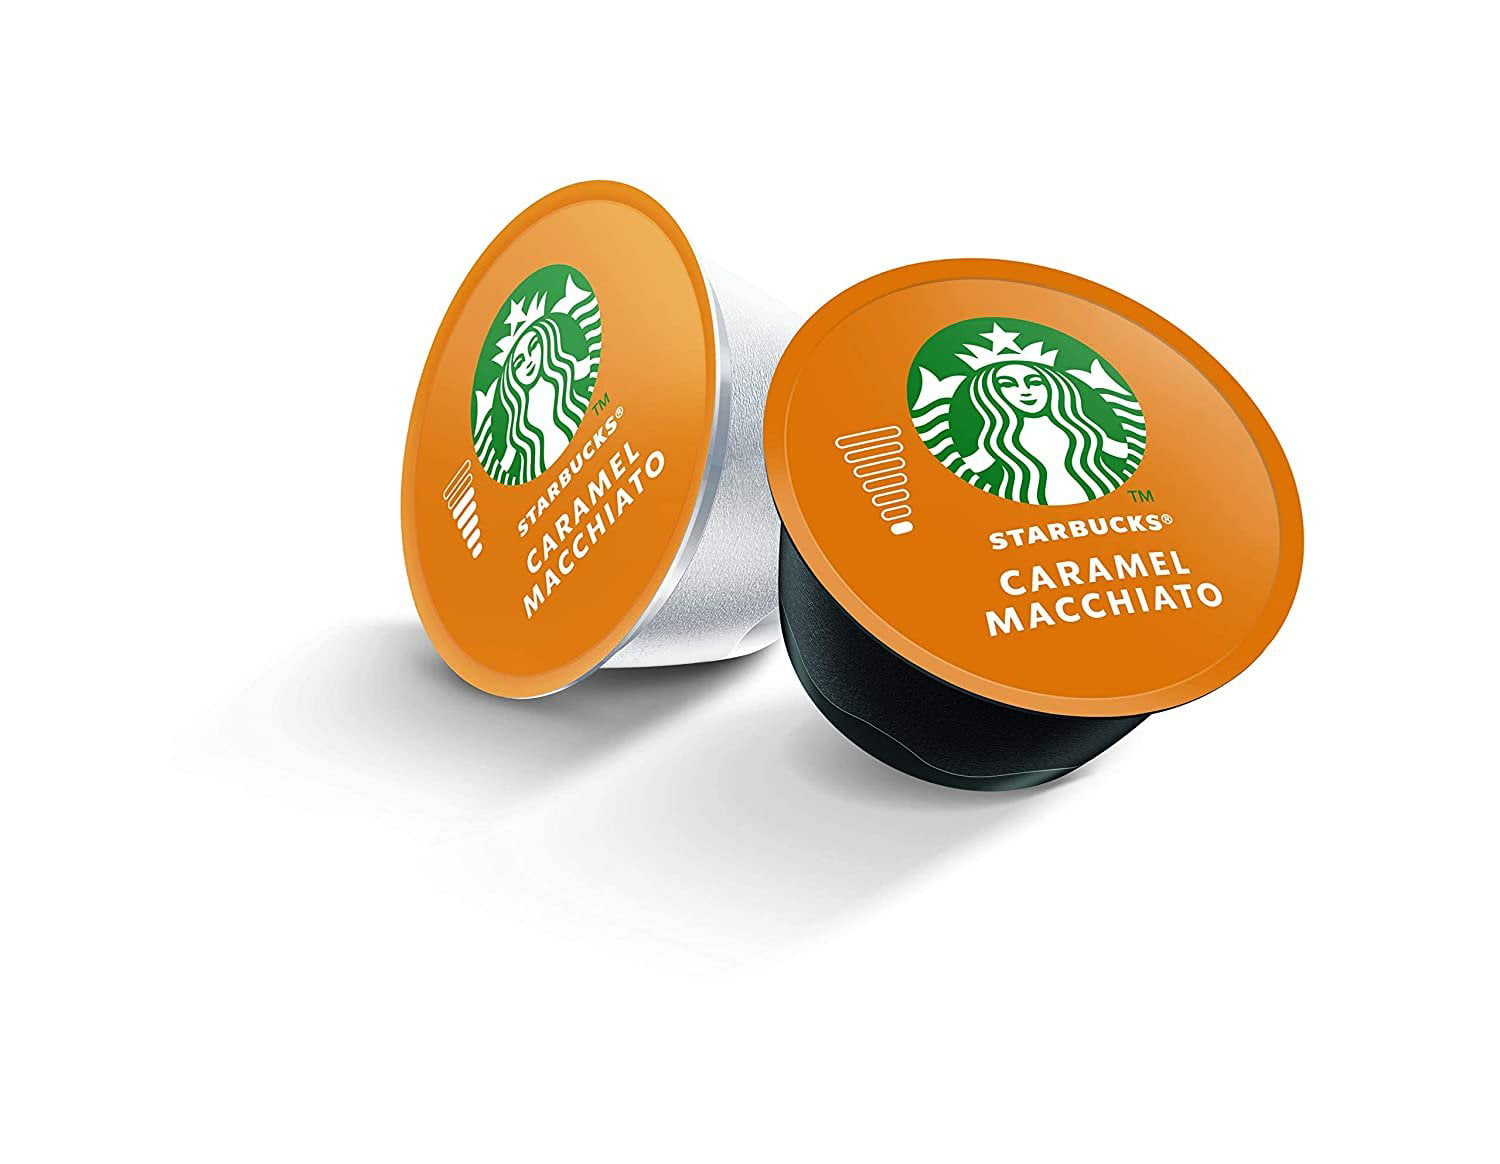 Starbucks Coffee by Nescafe Dolce Gusto, Starbucks Caramel Macchiato,  Coffee Pods, 12 capsules, Pack of 3 Packaging May Vary 